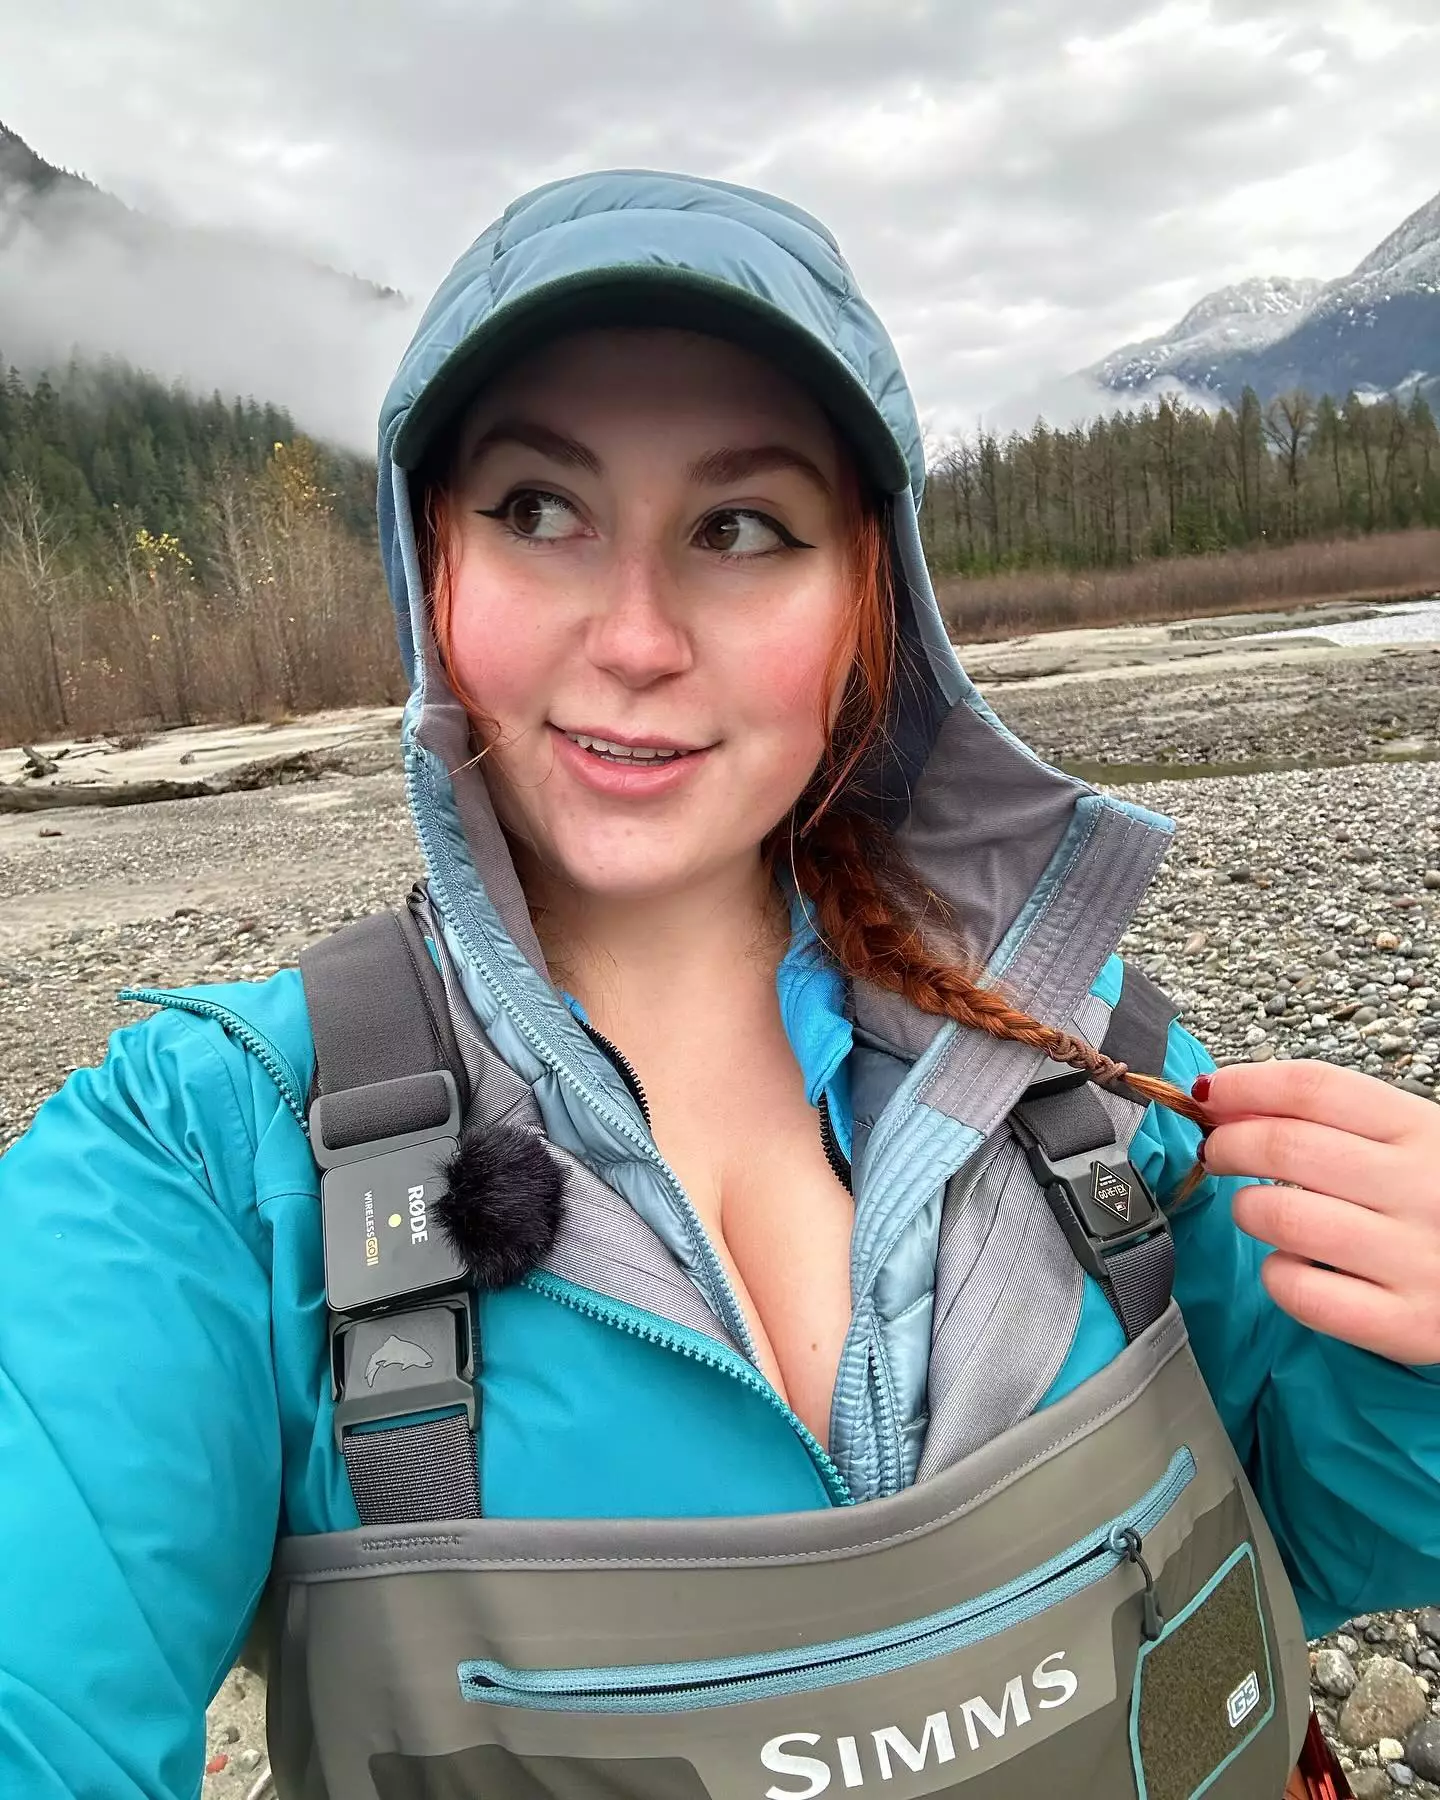 Isla makes a lot of outdoorsy videos.